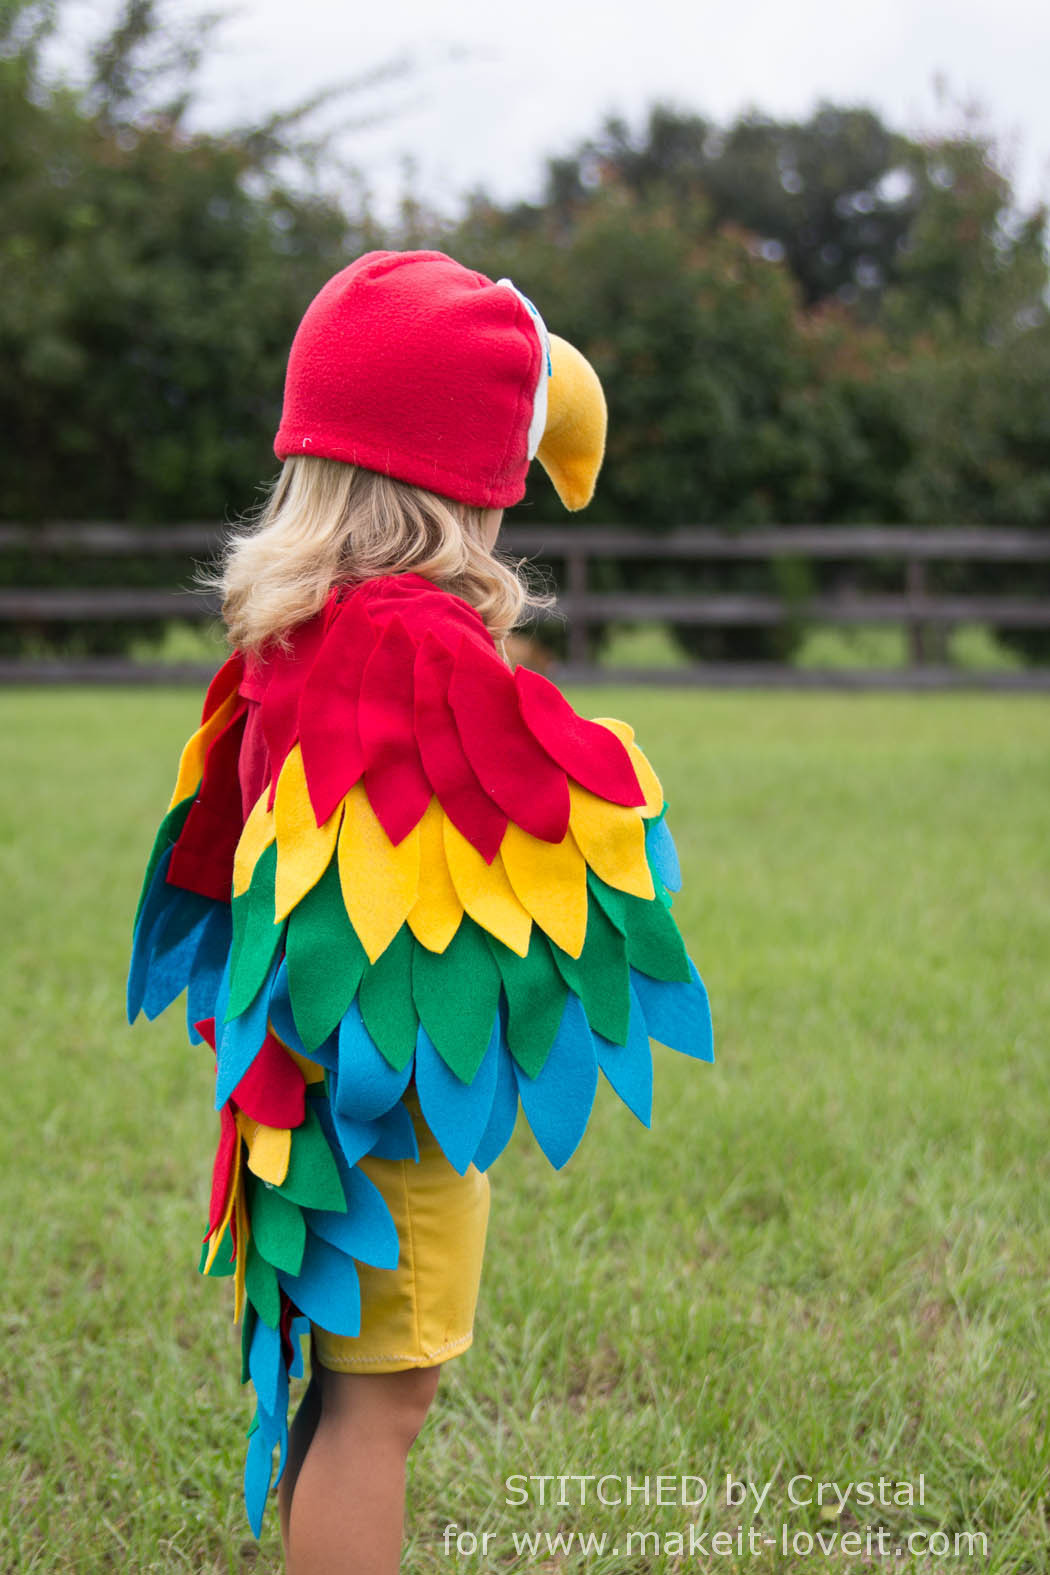 DIY Parrot Costume
 Parrot Costume DIY How to Make a Homemade Parrot Costume